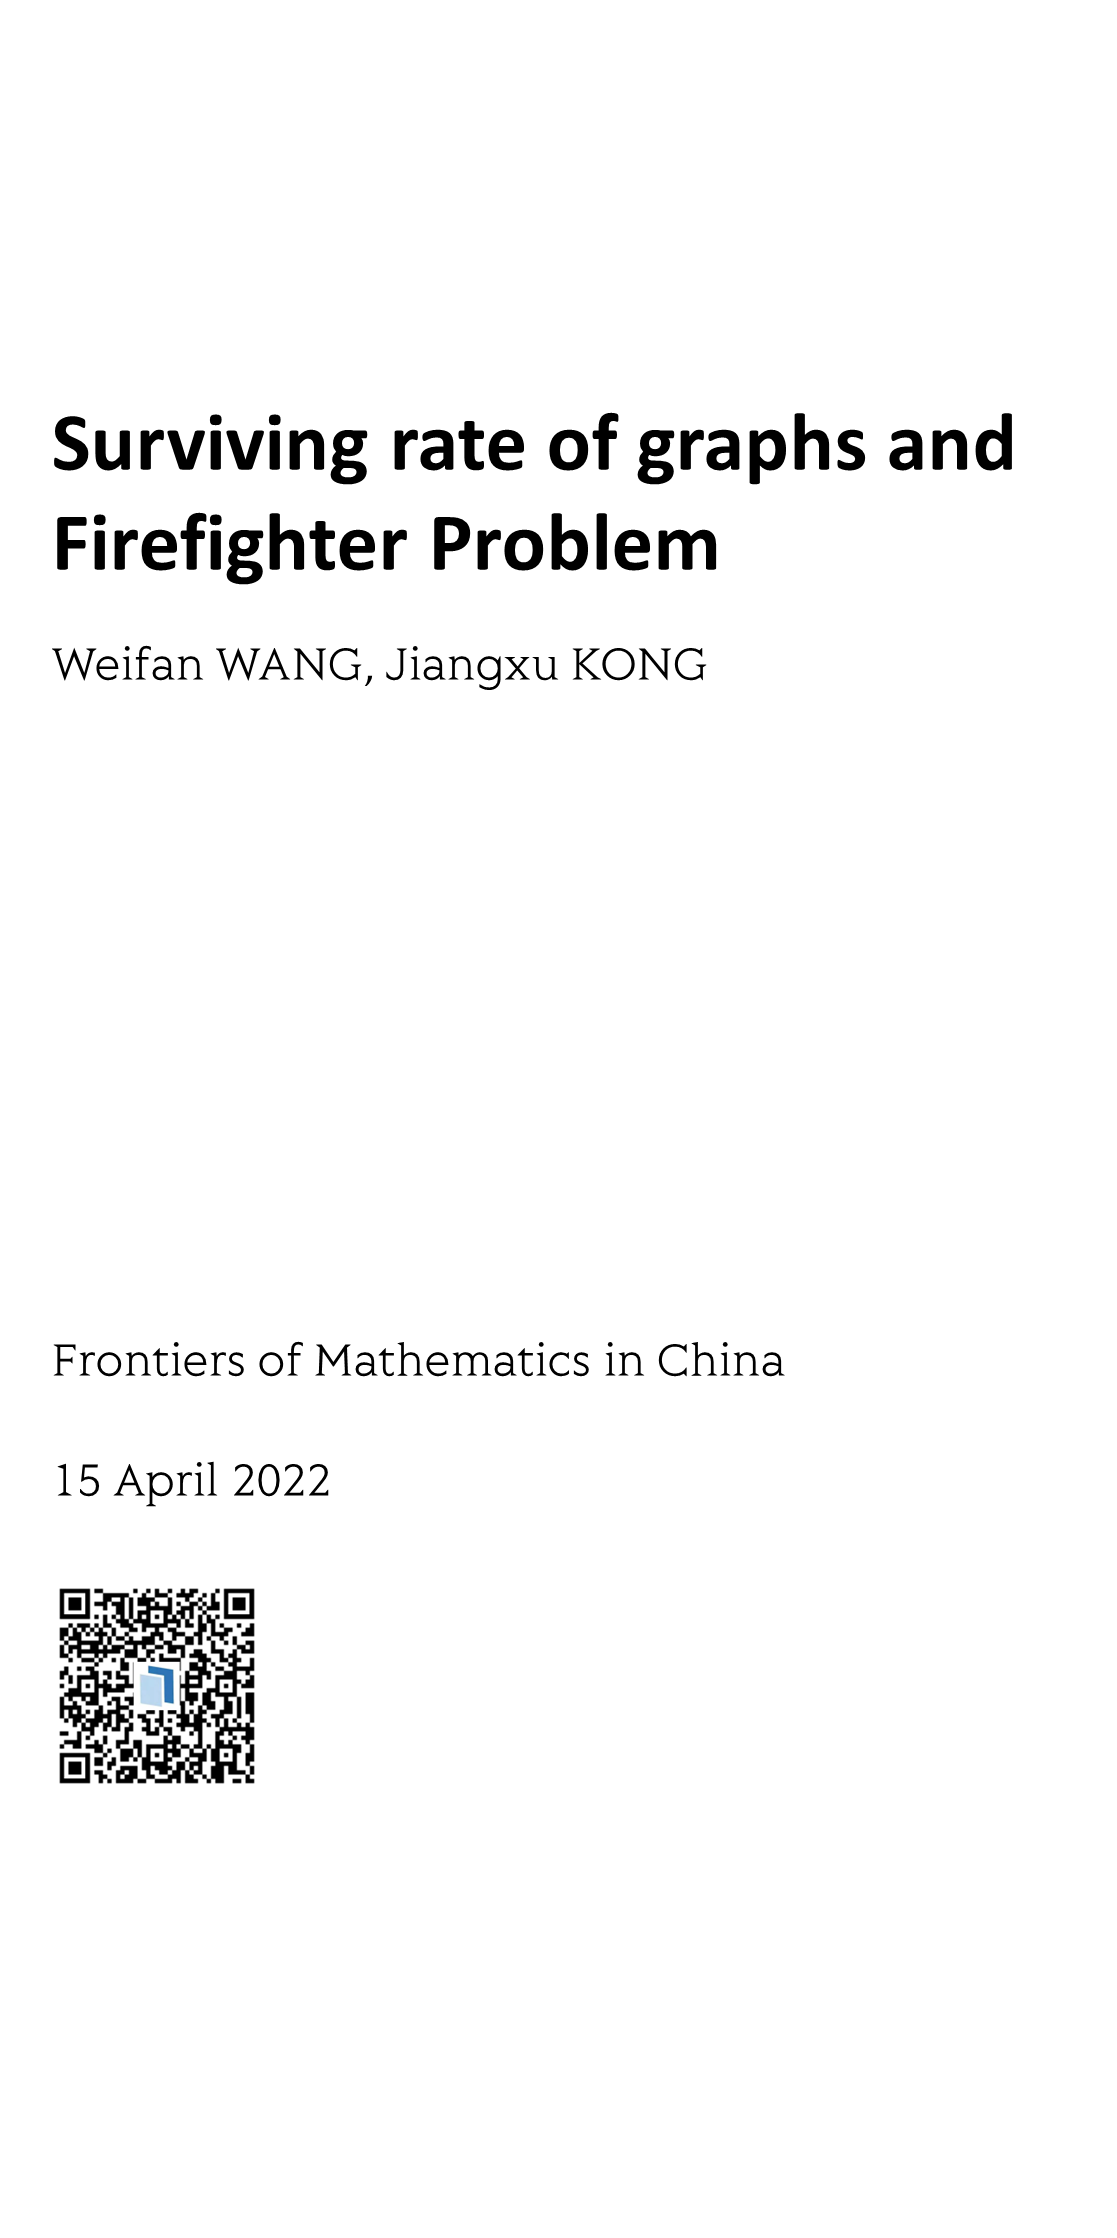 Frontiers of Mathematics in China_1